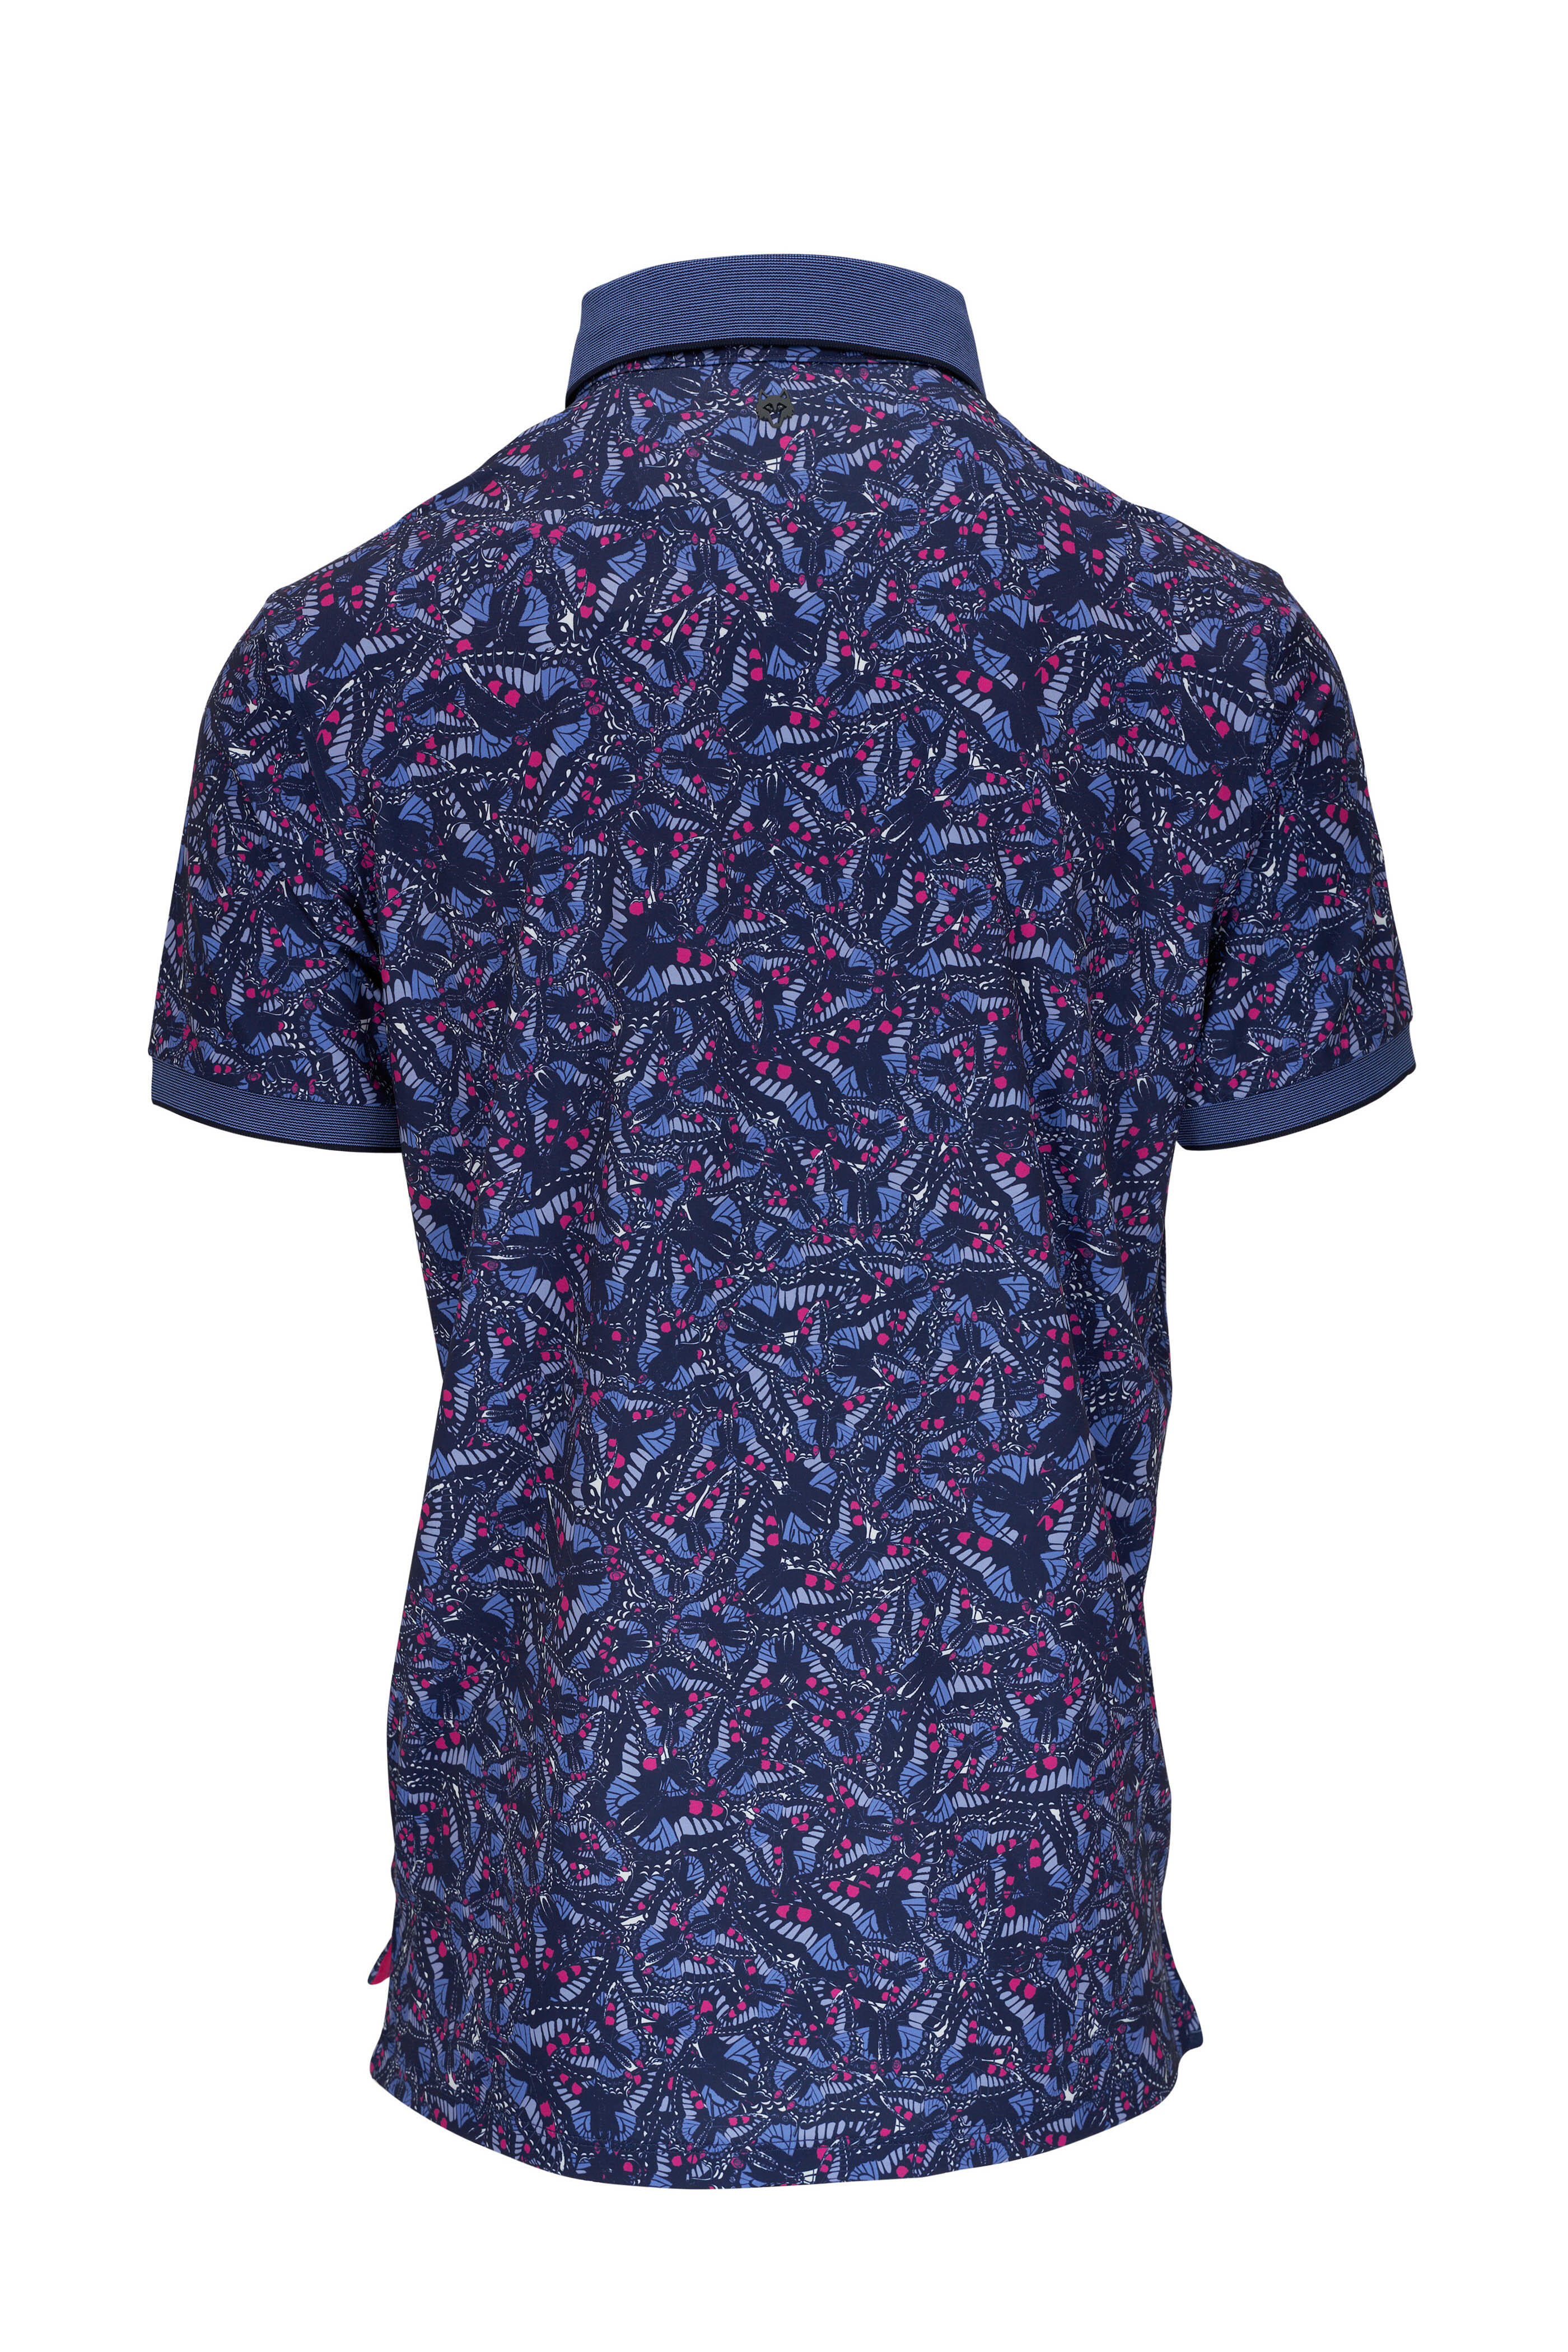 Men's Floral Polo Shirt with Butterfly Print UK